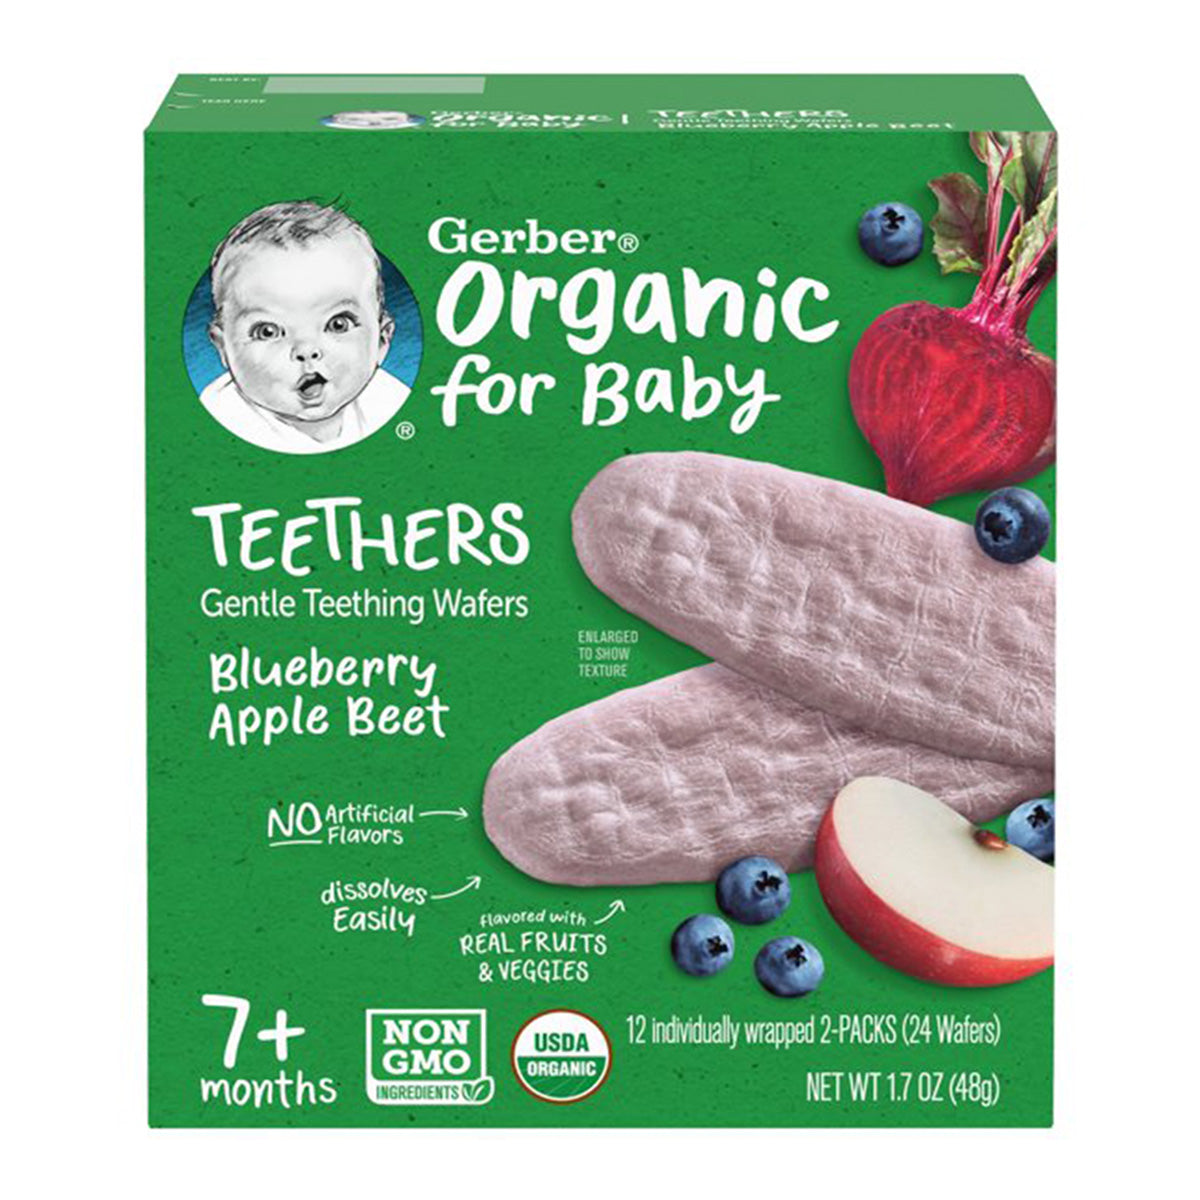 Gerber Organic for Baby, Teethers, Blueberry Apple Beet - 48g